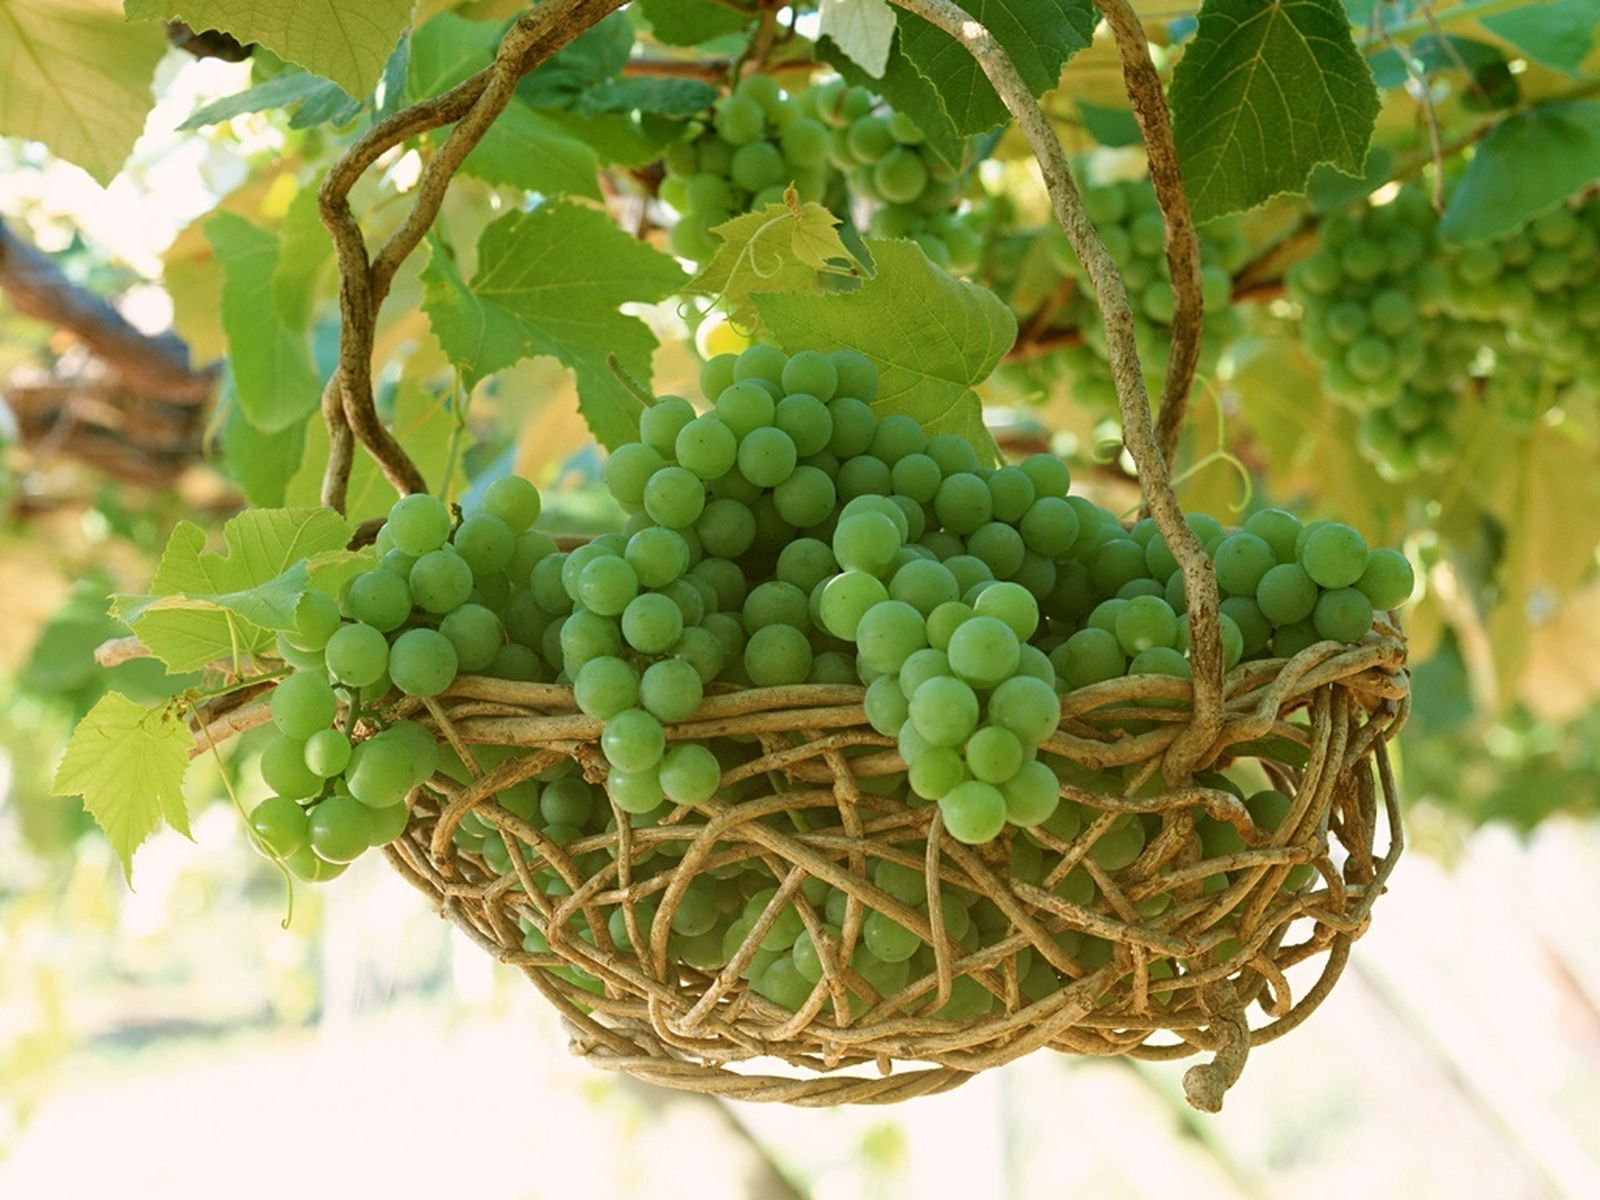 Round Green Grapes - Grapes Fruit - 1600x1200 Wallpaper 